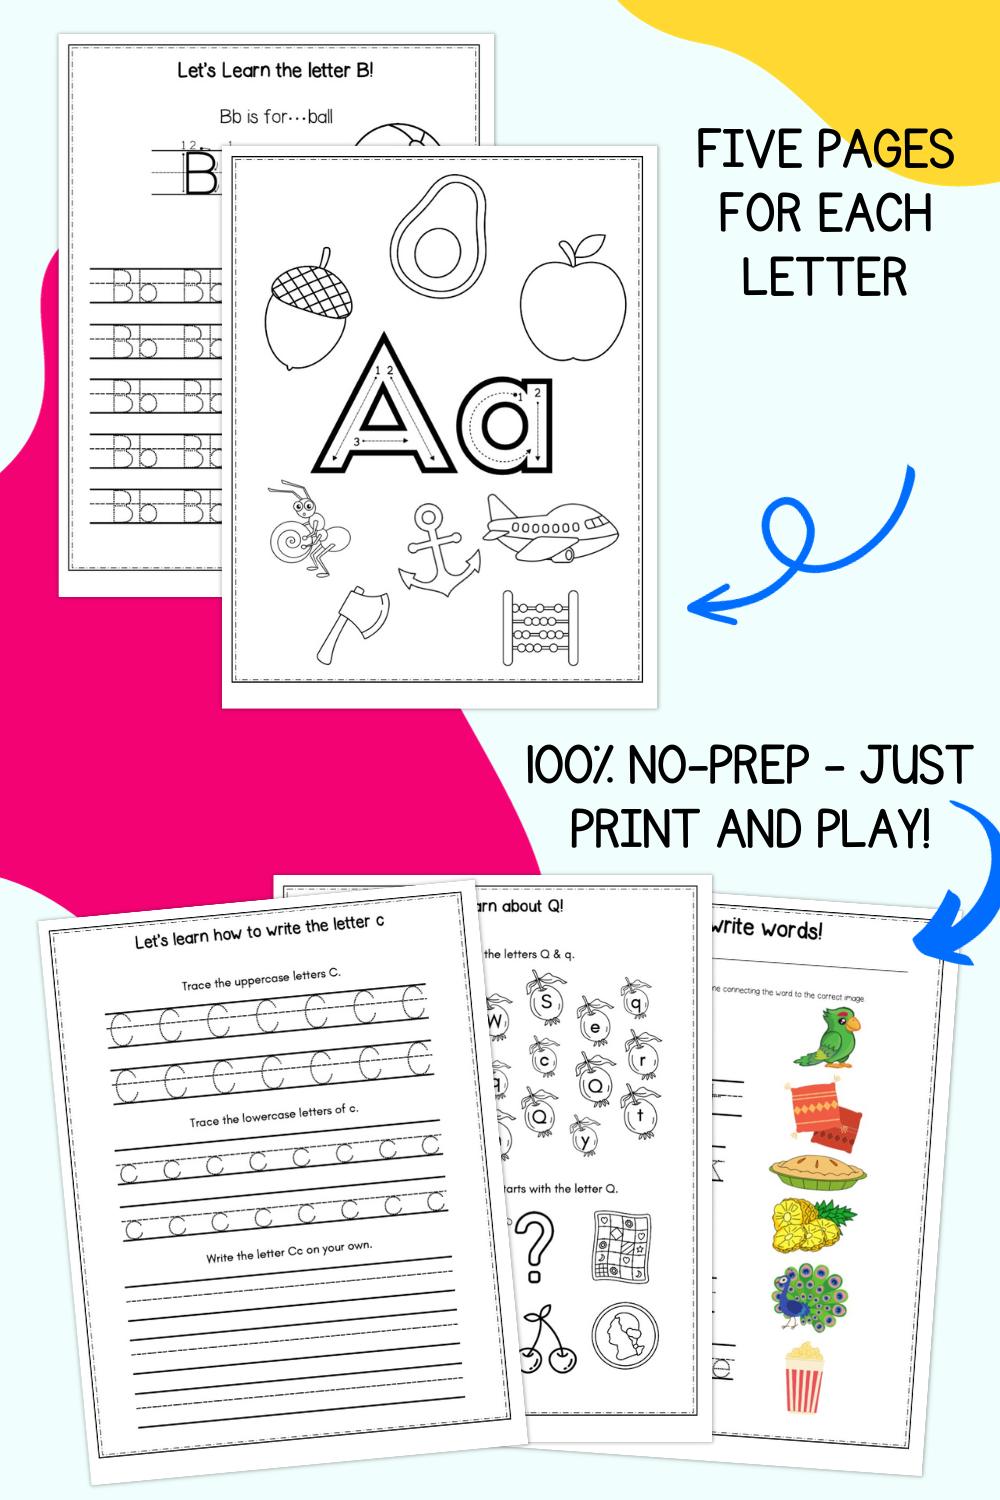 Text "five pages for each letter" and "100% no-prep - just print and play!: with a preview of five workbook pages